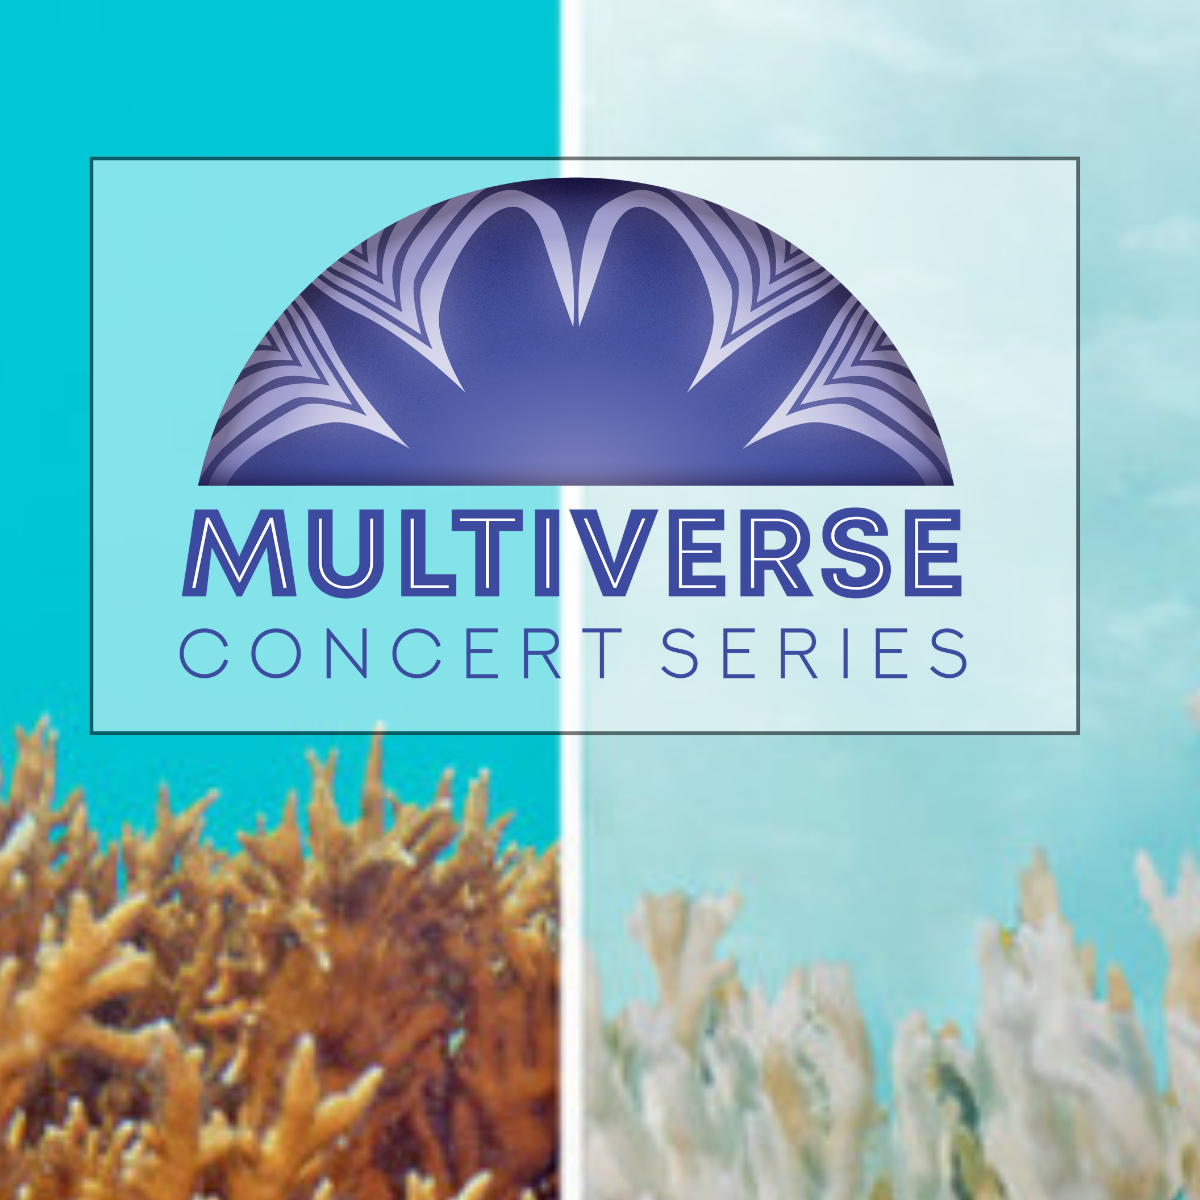 Multiverse Concert Series Logo with reef photos